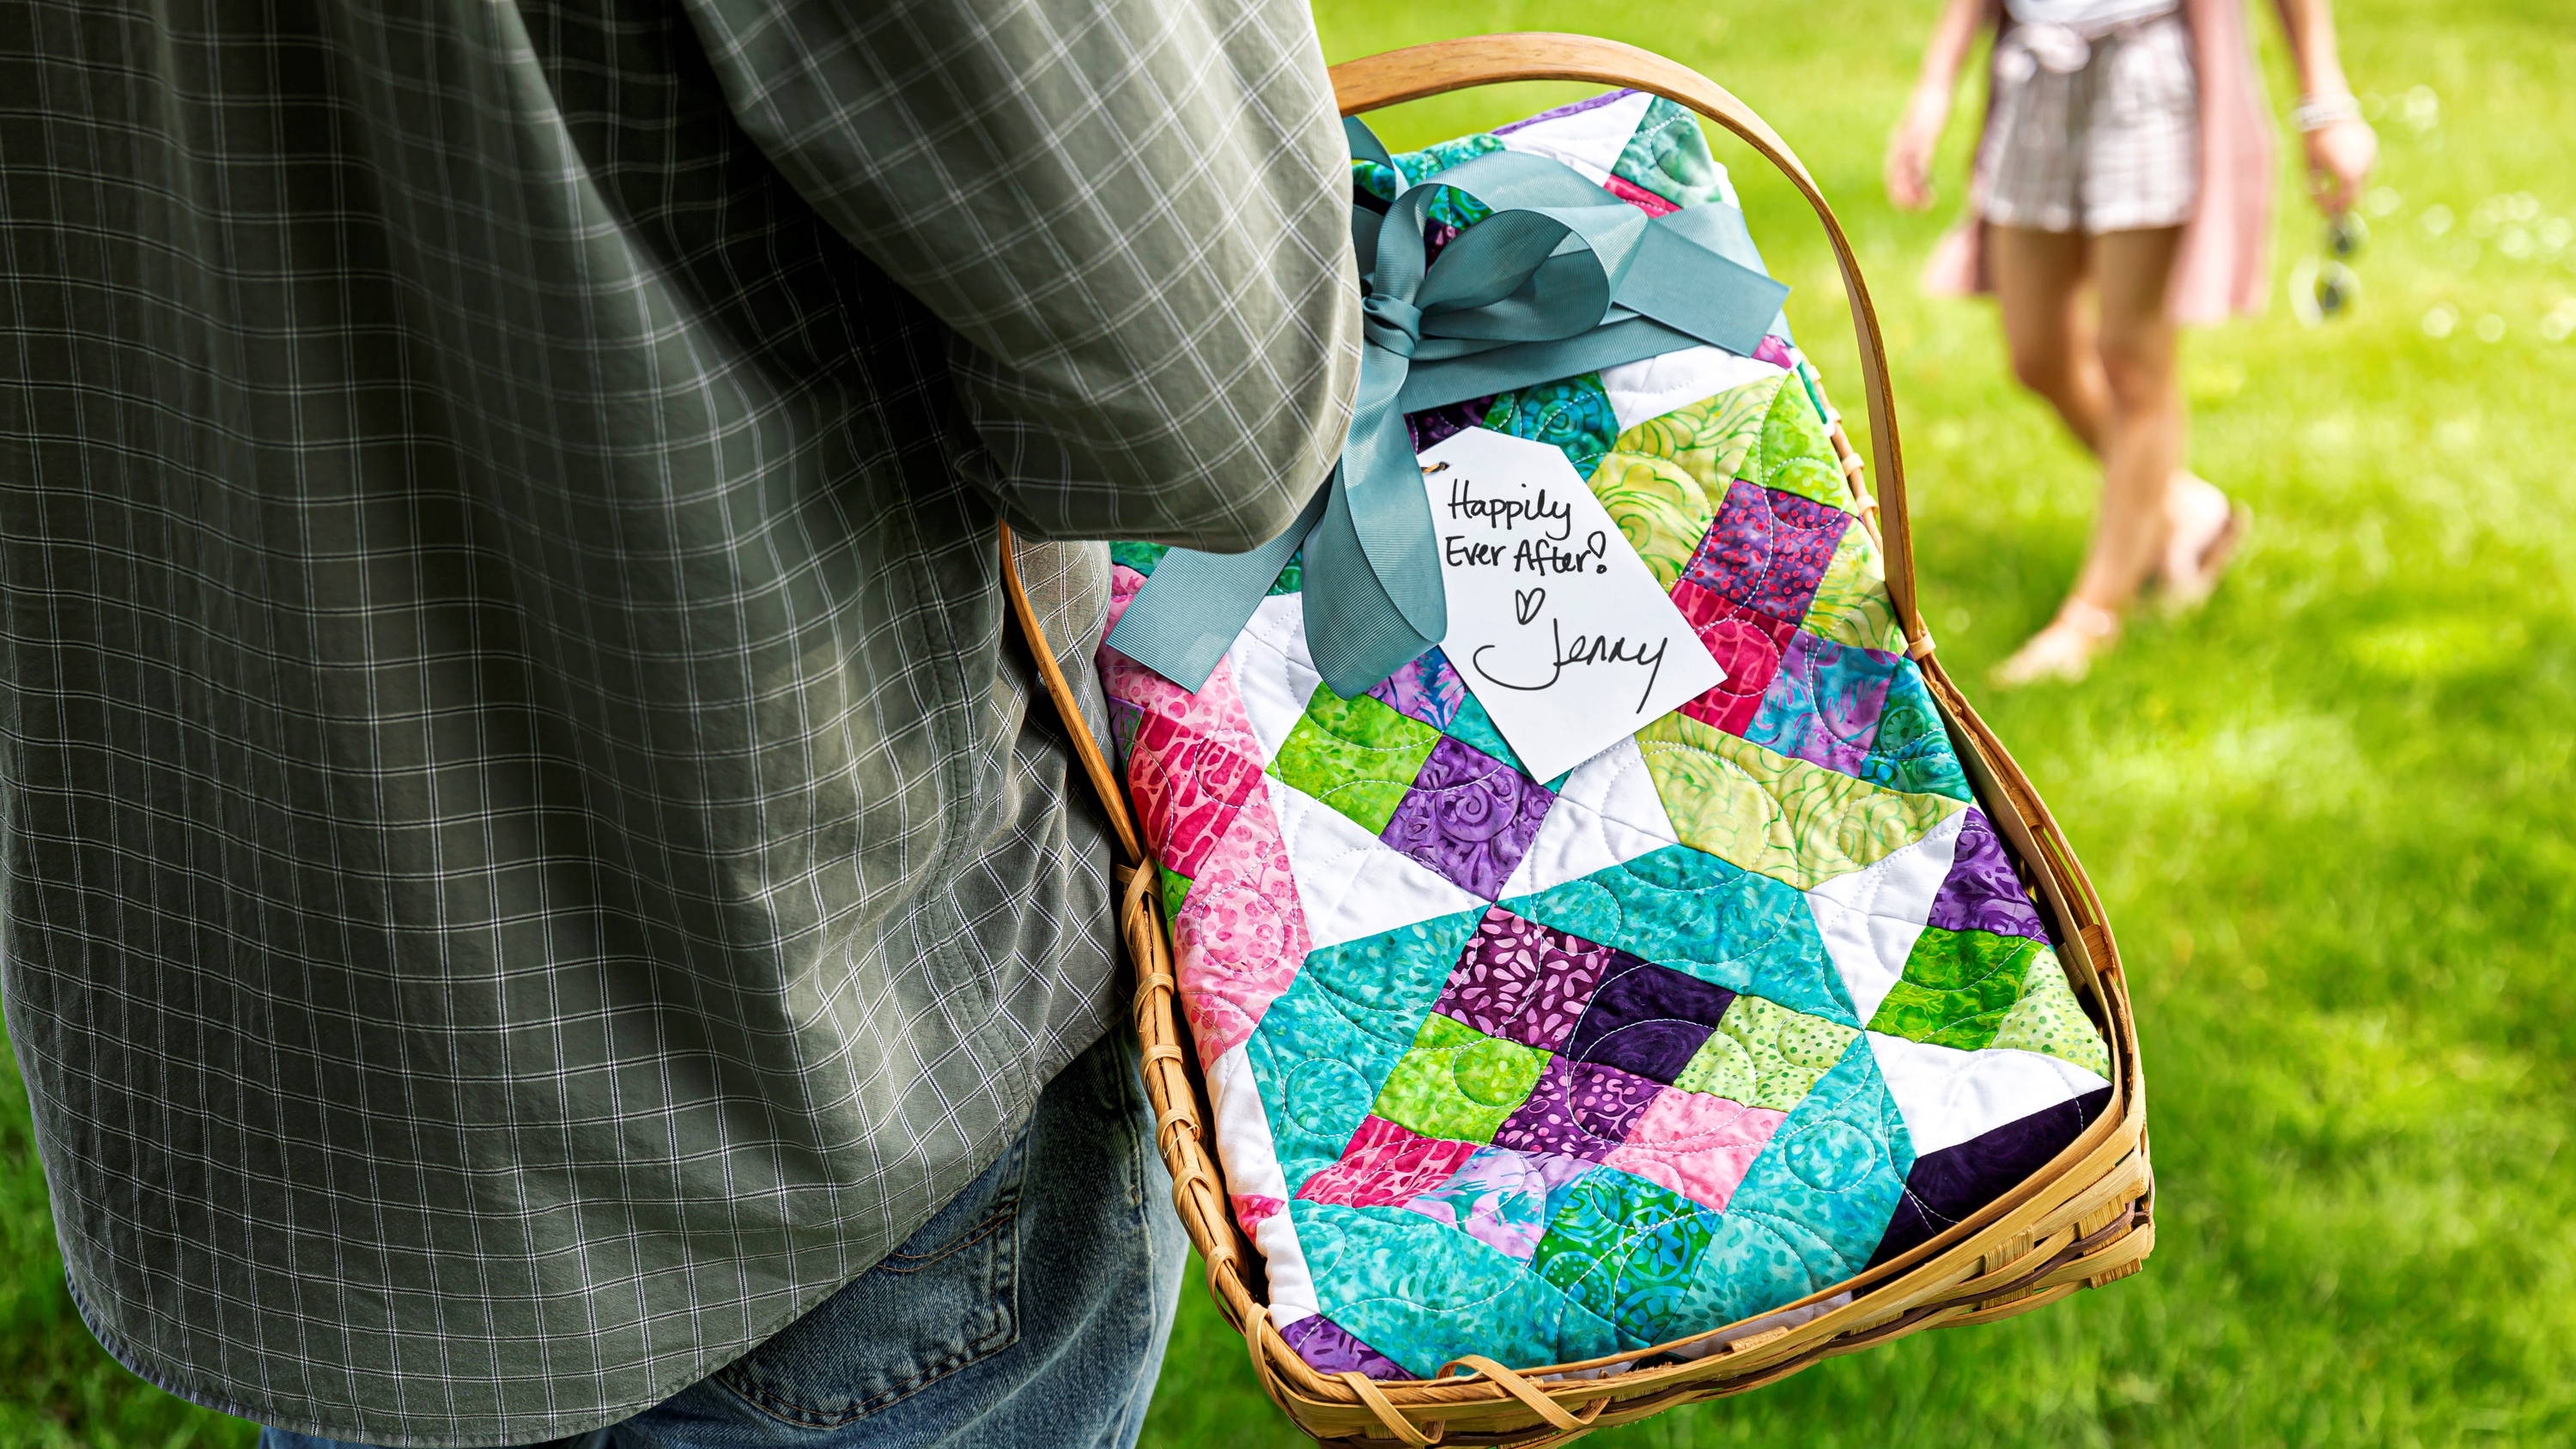 Hopscotch Picnic quilt to give as a wedding gift